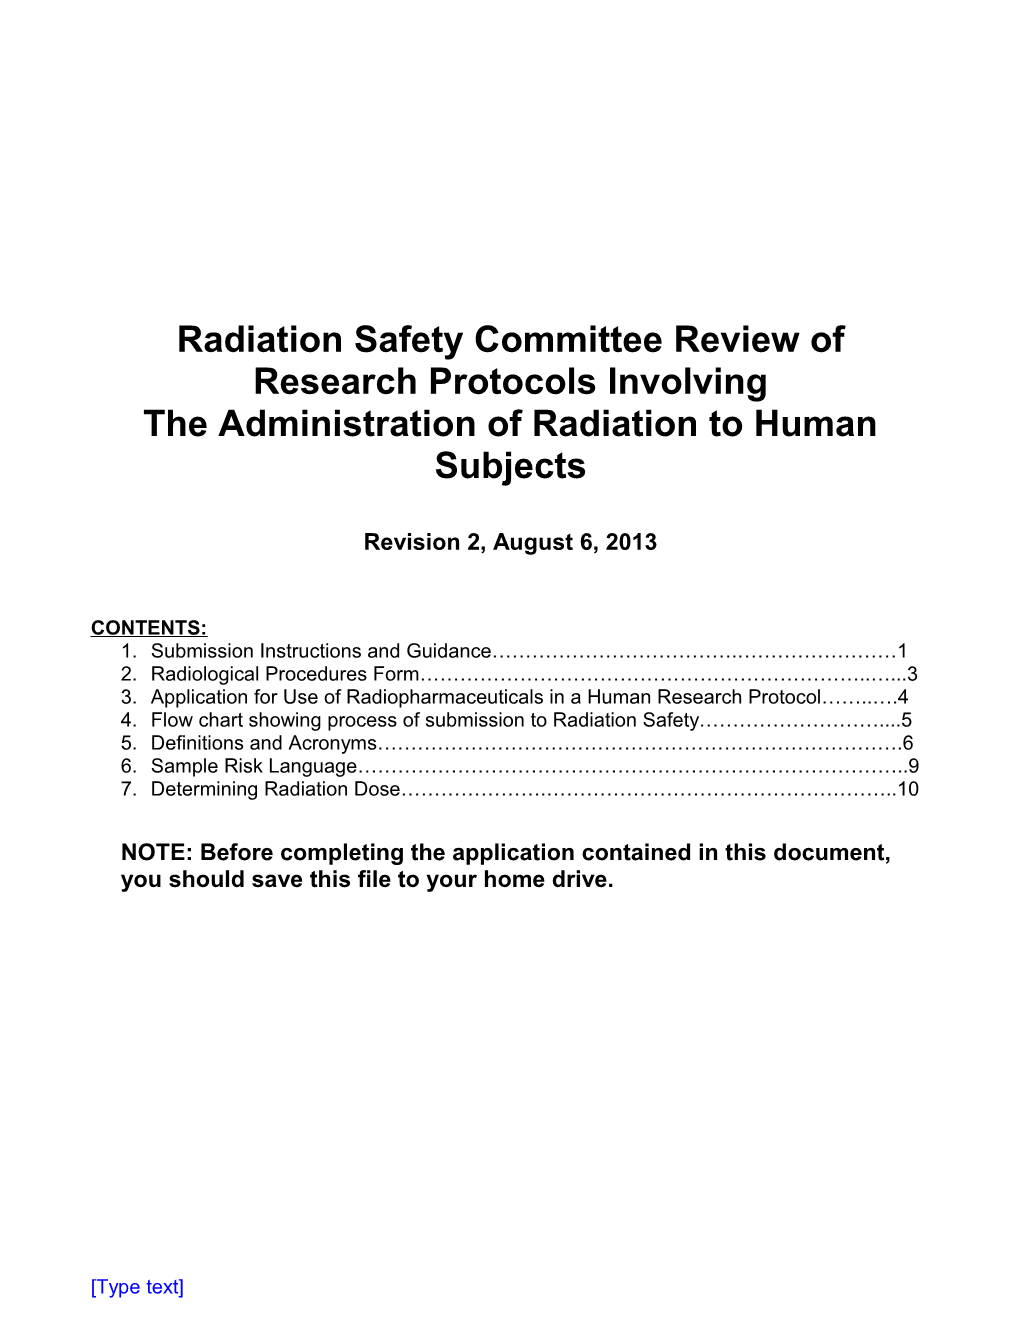 Radiation Safety Committee Review of Research Protocols Involving